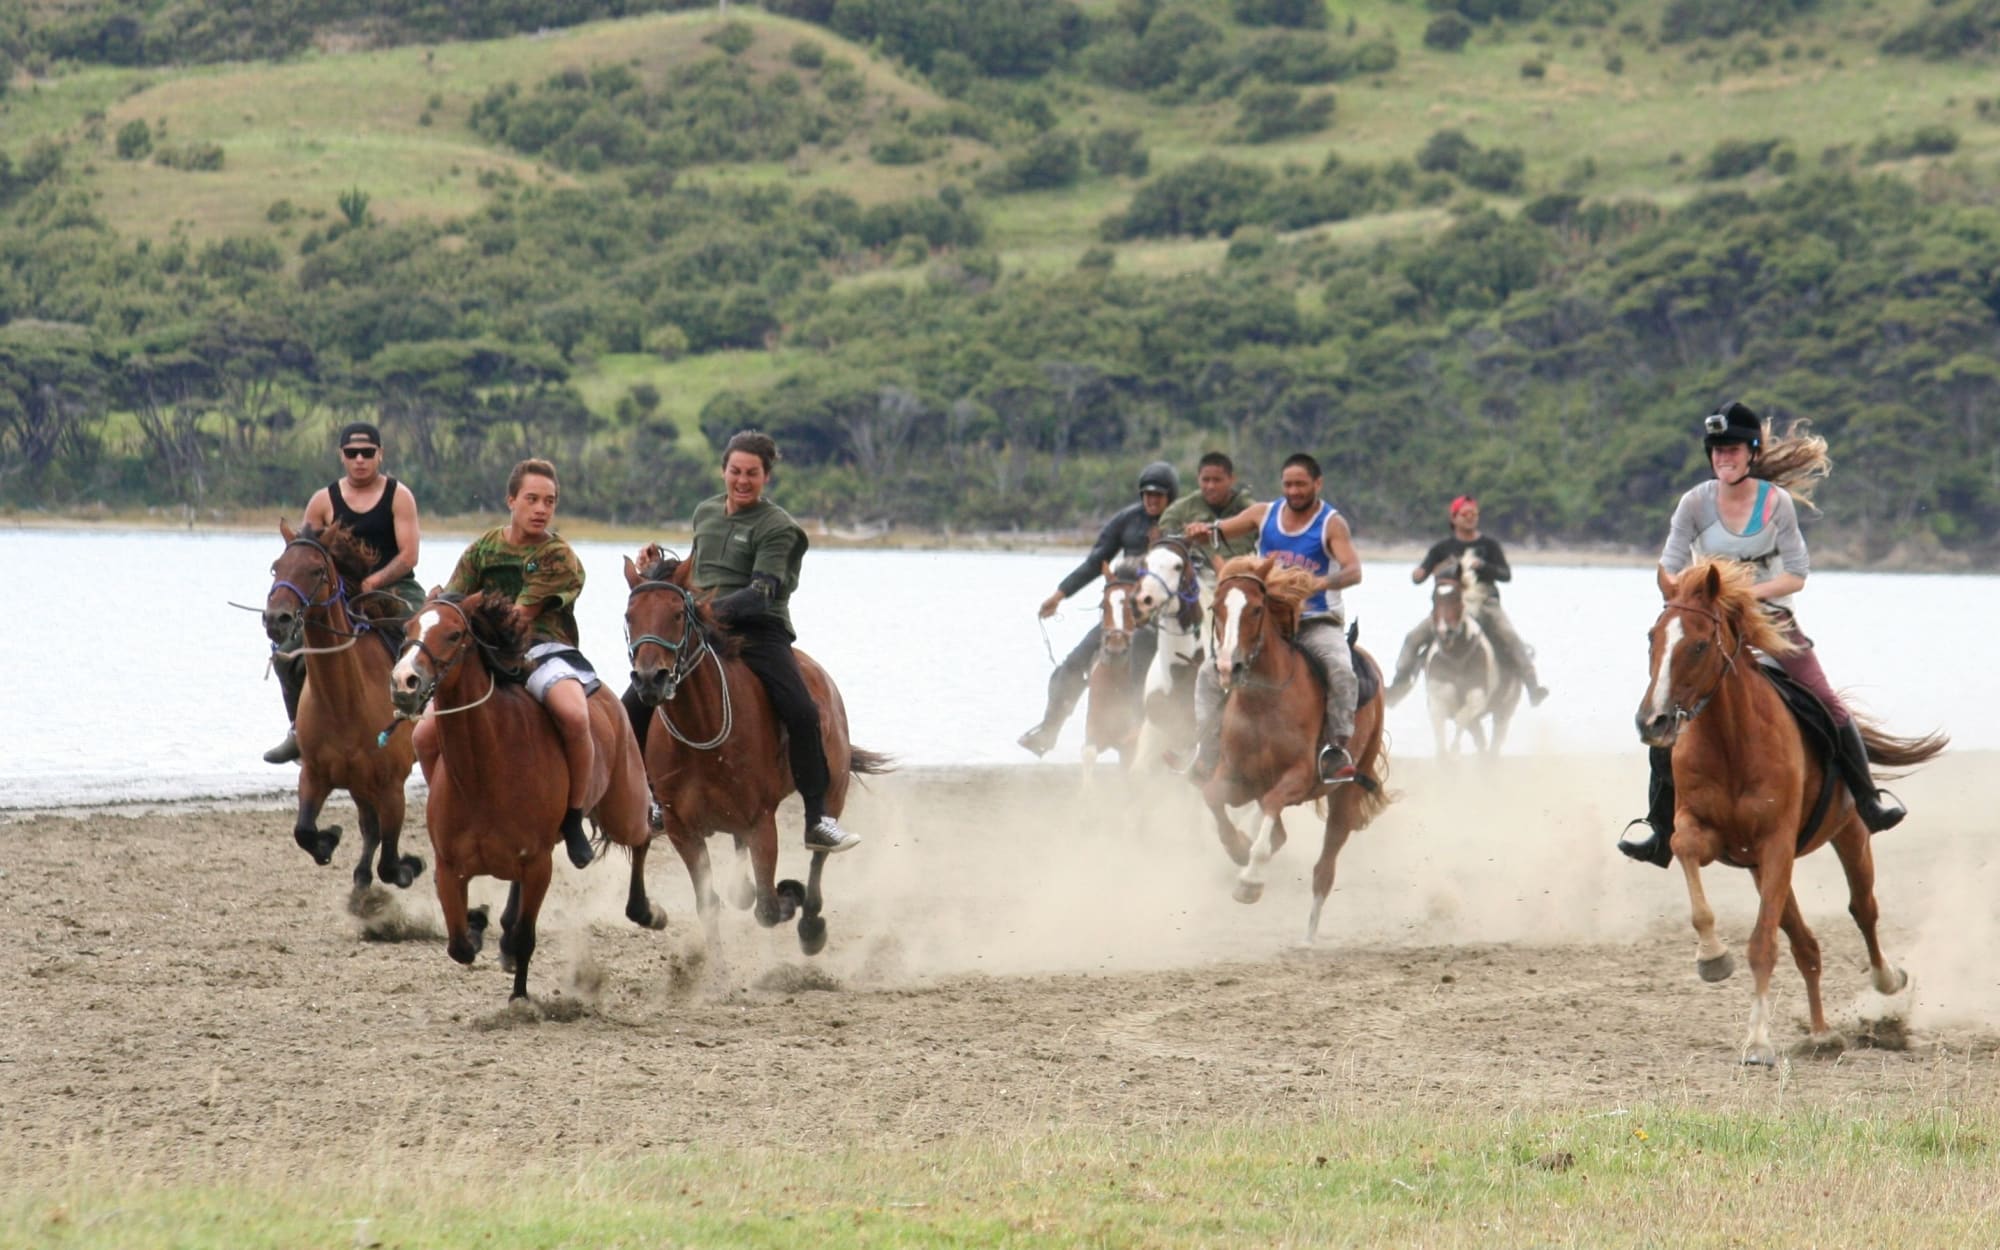 Horse racing at the United Marae Sports Day held in Pawarenga, Northland.